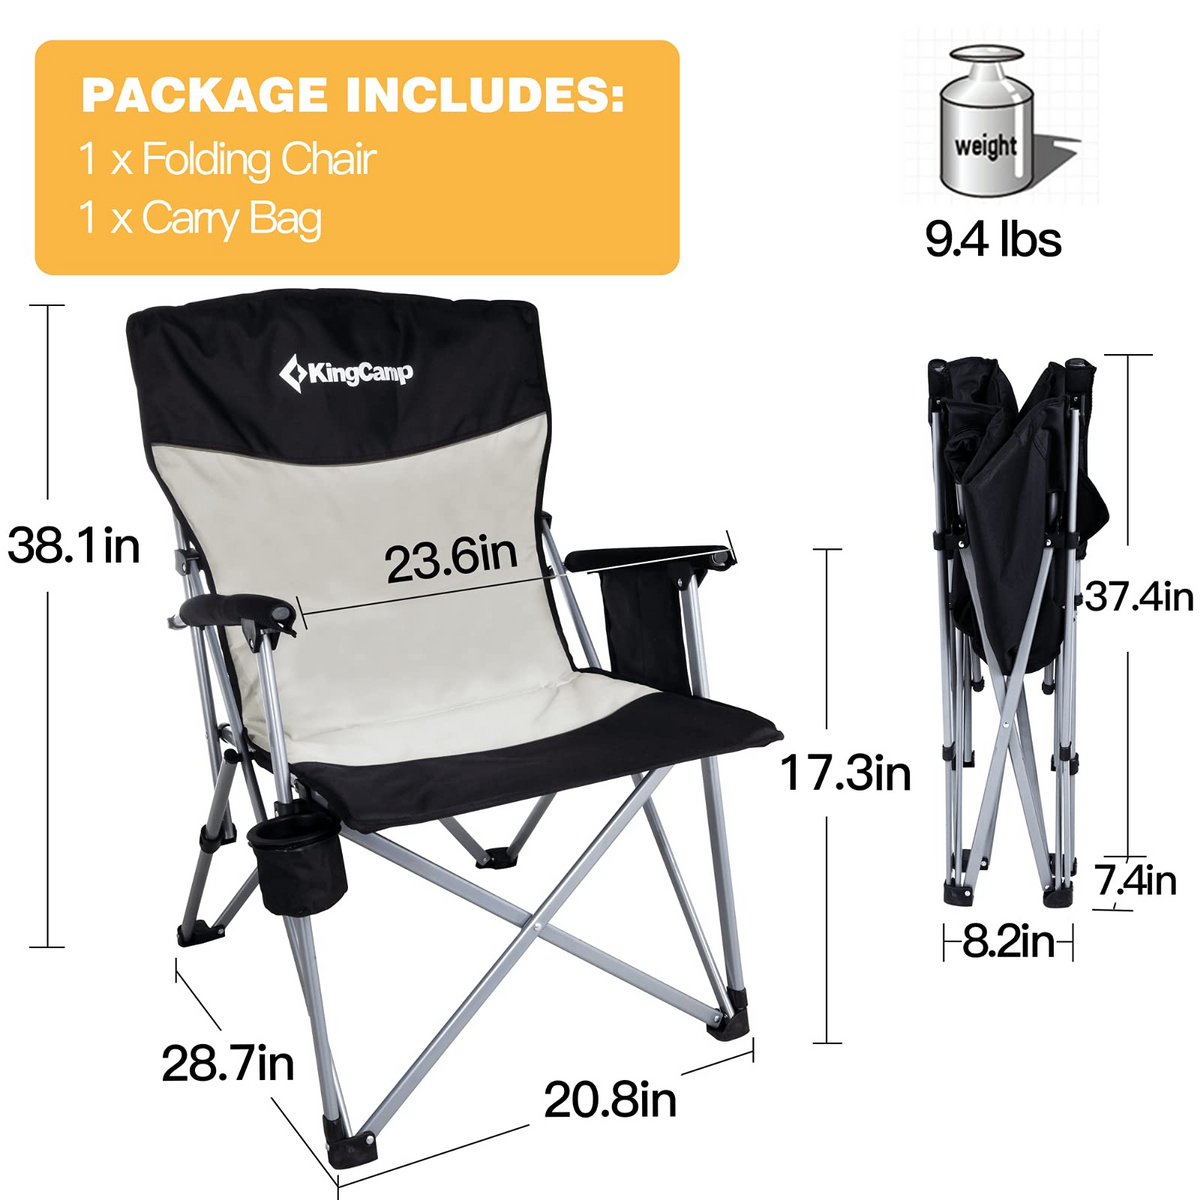 Shop KingCamp Outdoor Folding Camping Chair Online Now – KingCamp Outdoors